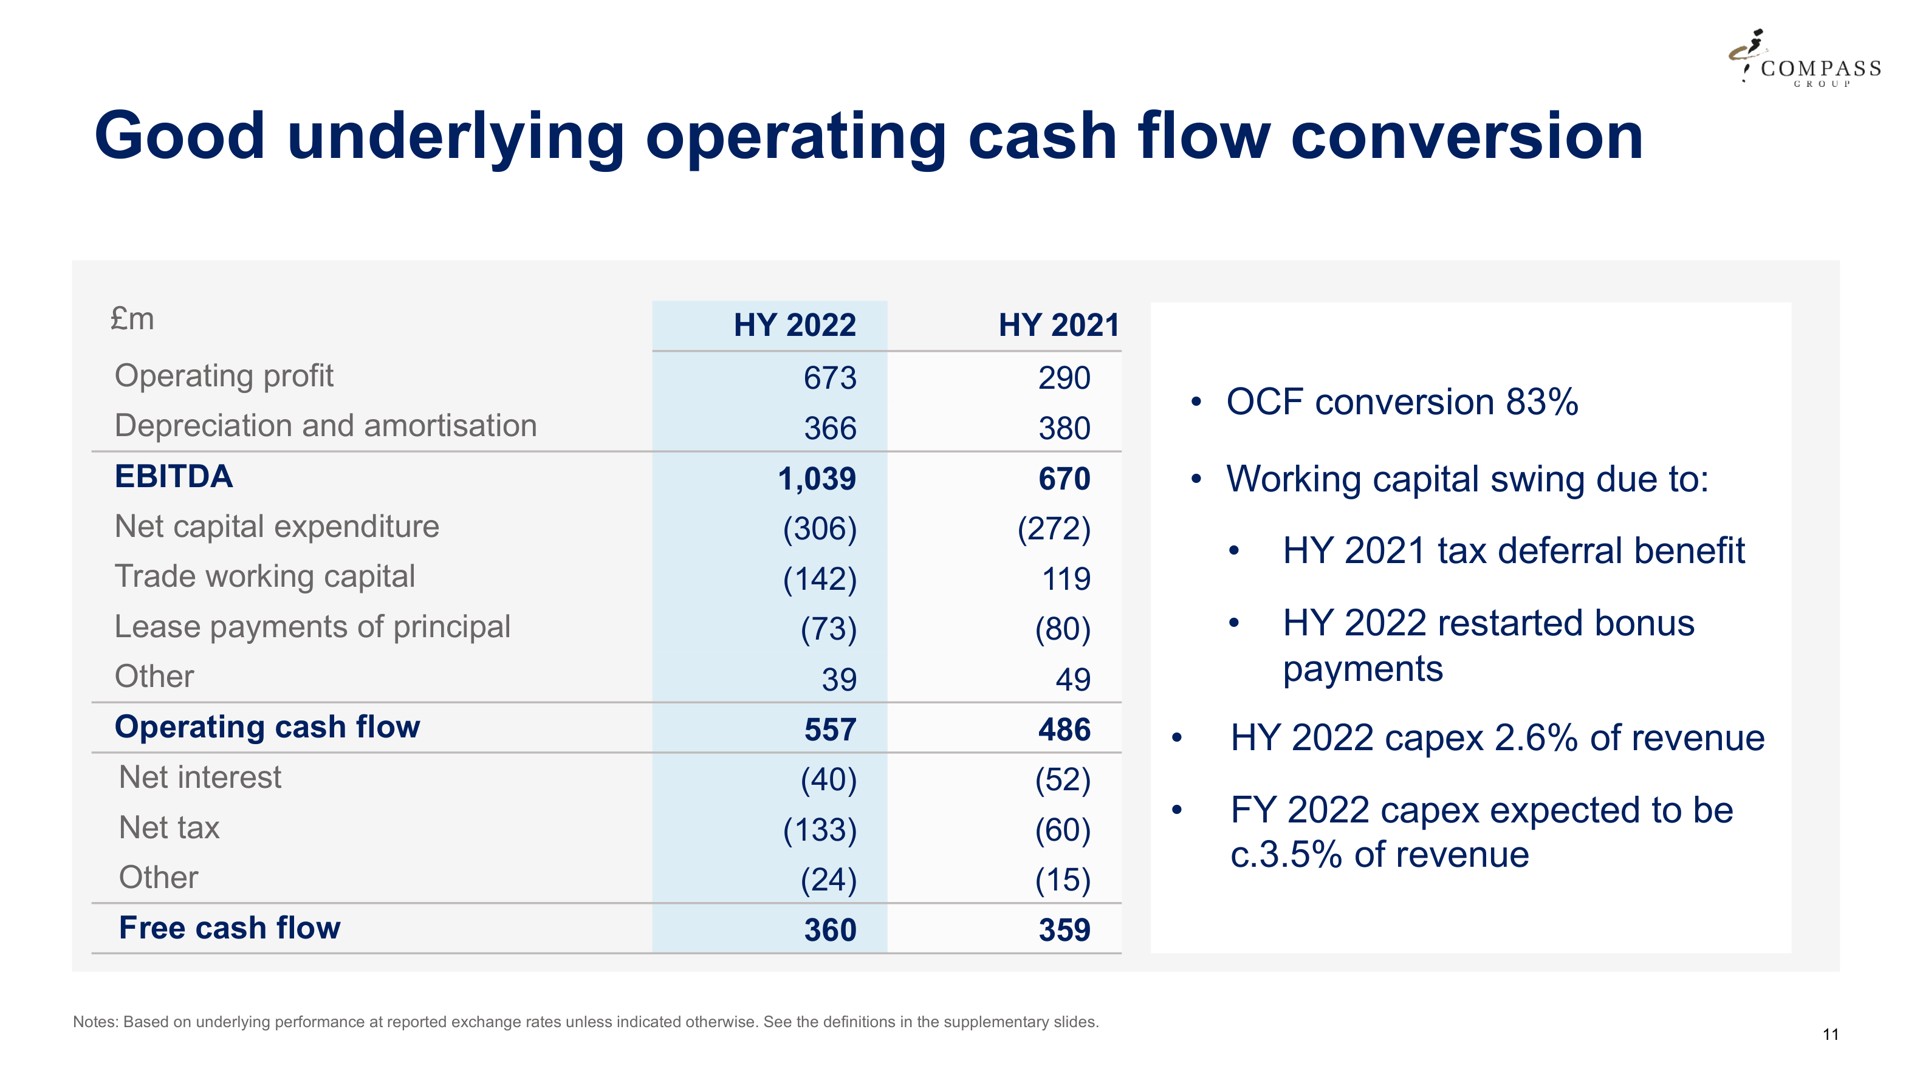 good underlying operating cash flow conversion | Compass Group